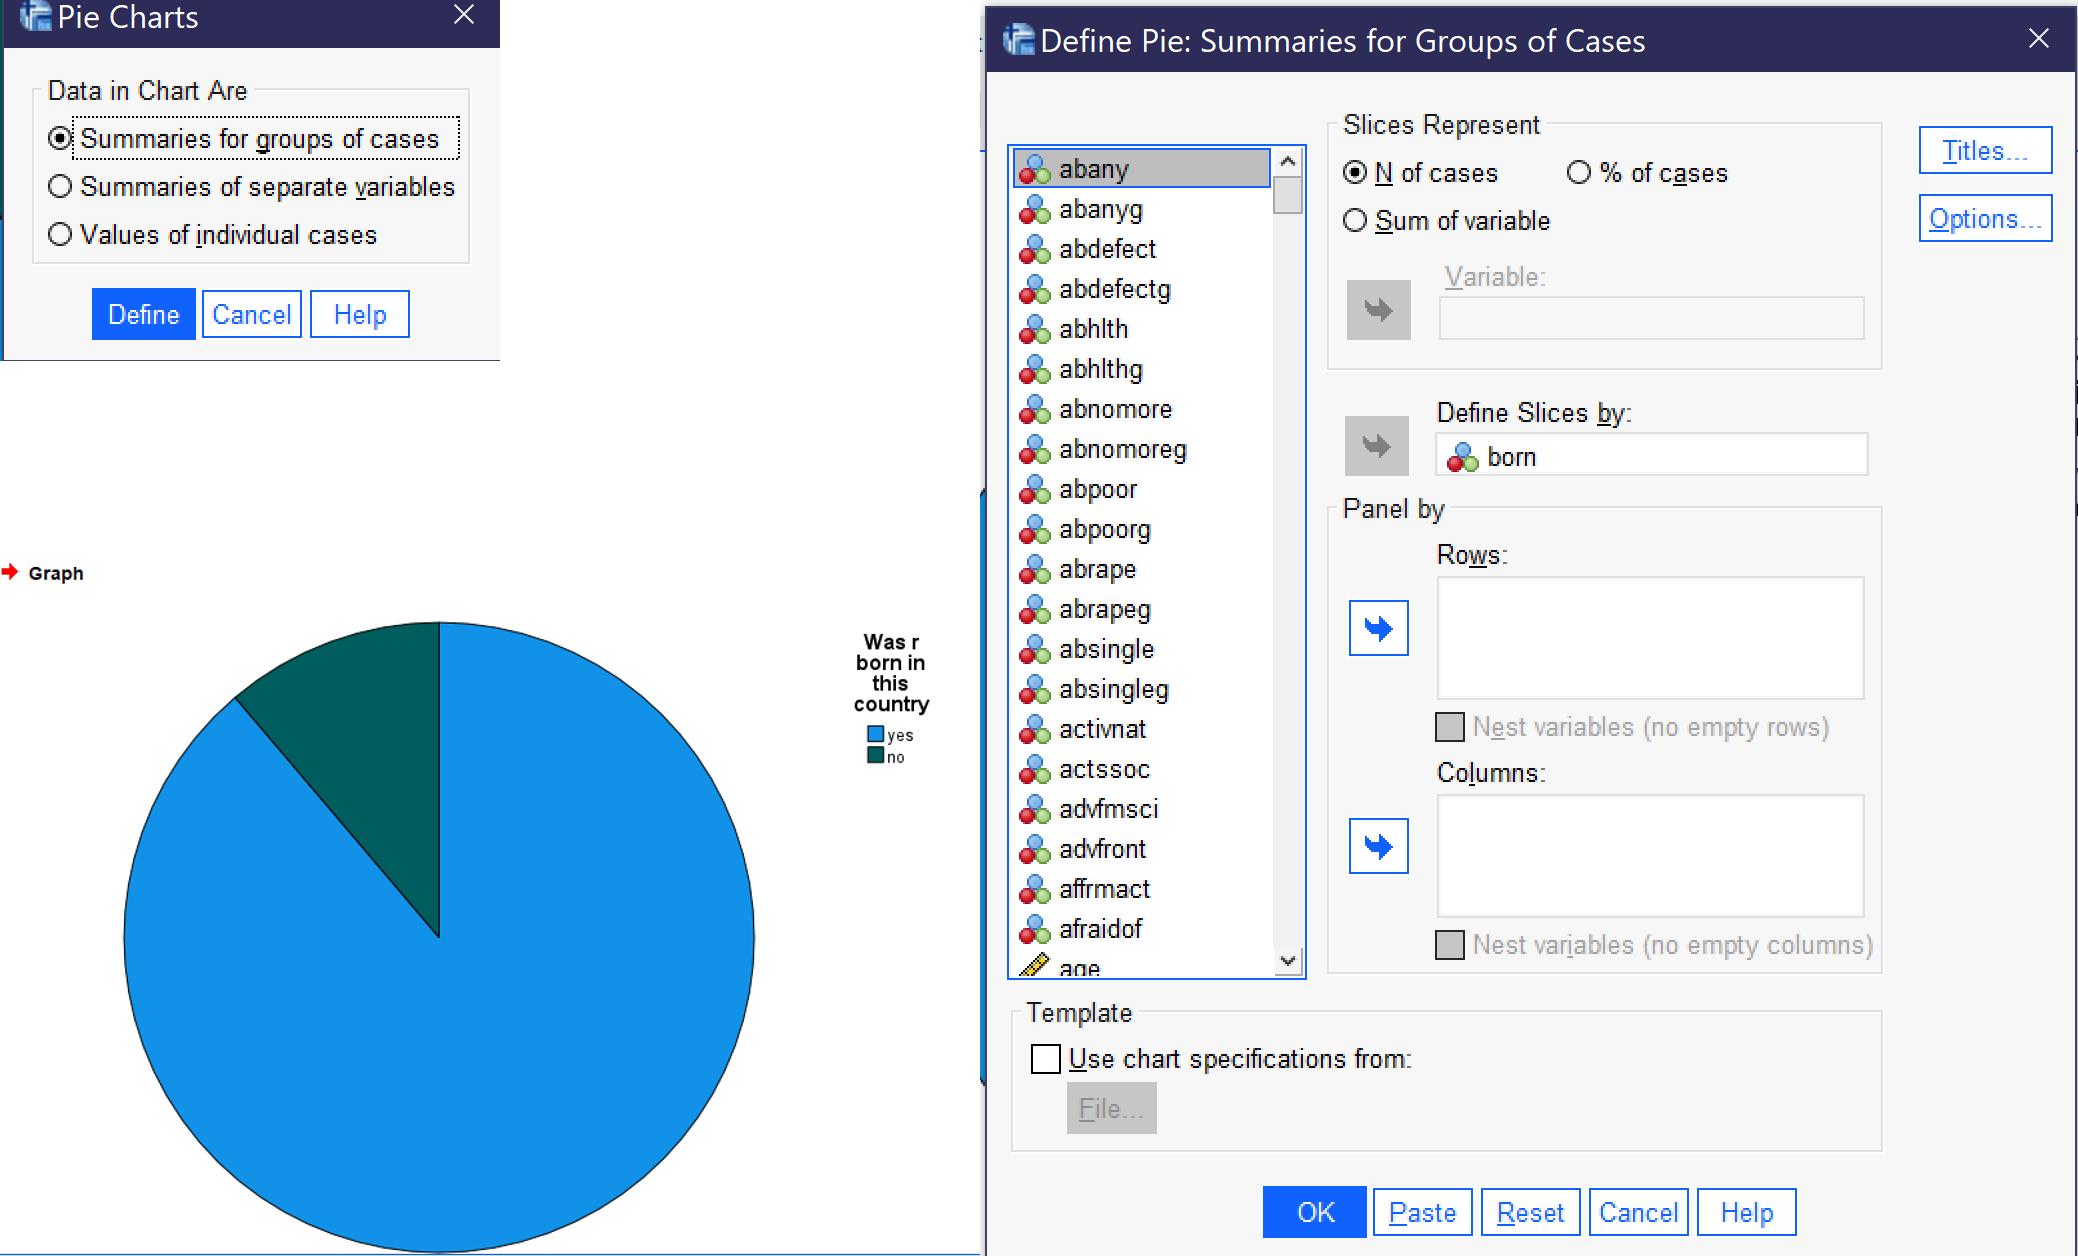 Alt+G, Alt+L, Alt+E selects the pie chart dialog. Alt+G selects summaries for groups of cases. Alt+N selects number of cases and Alt+A selects percent of cases. Alt+b moves to the "Define slices by" field. The resulting graph shows that well more than three quarters of respondents were born in the United States.